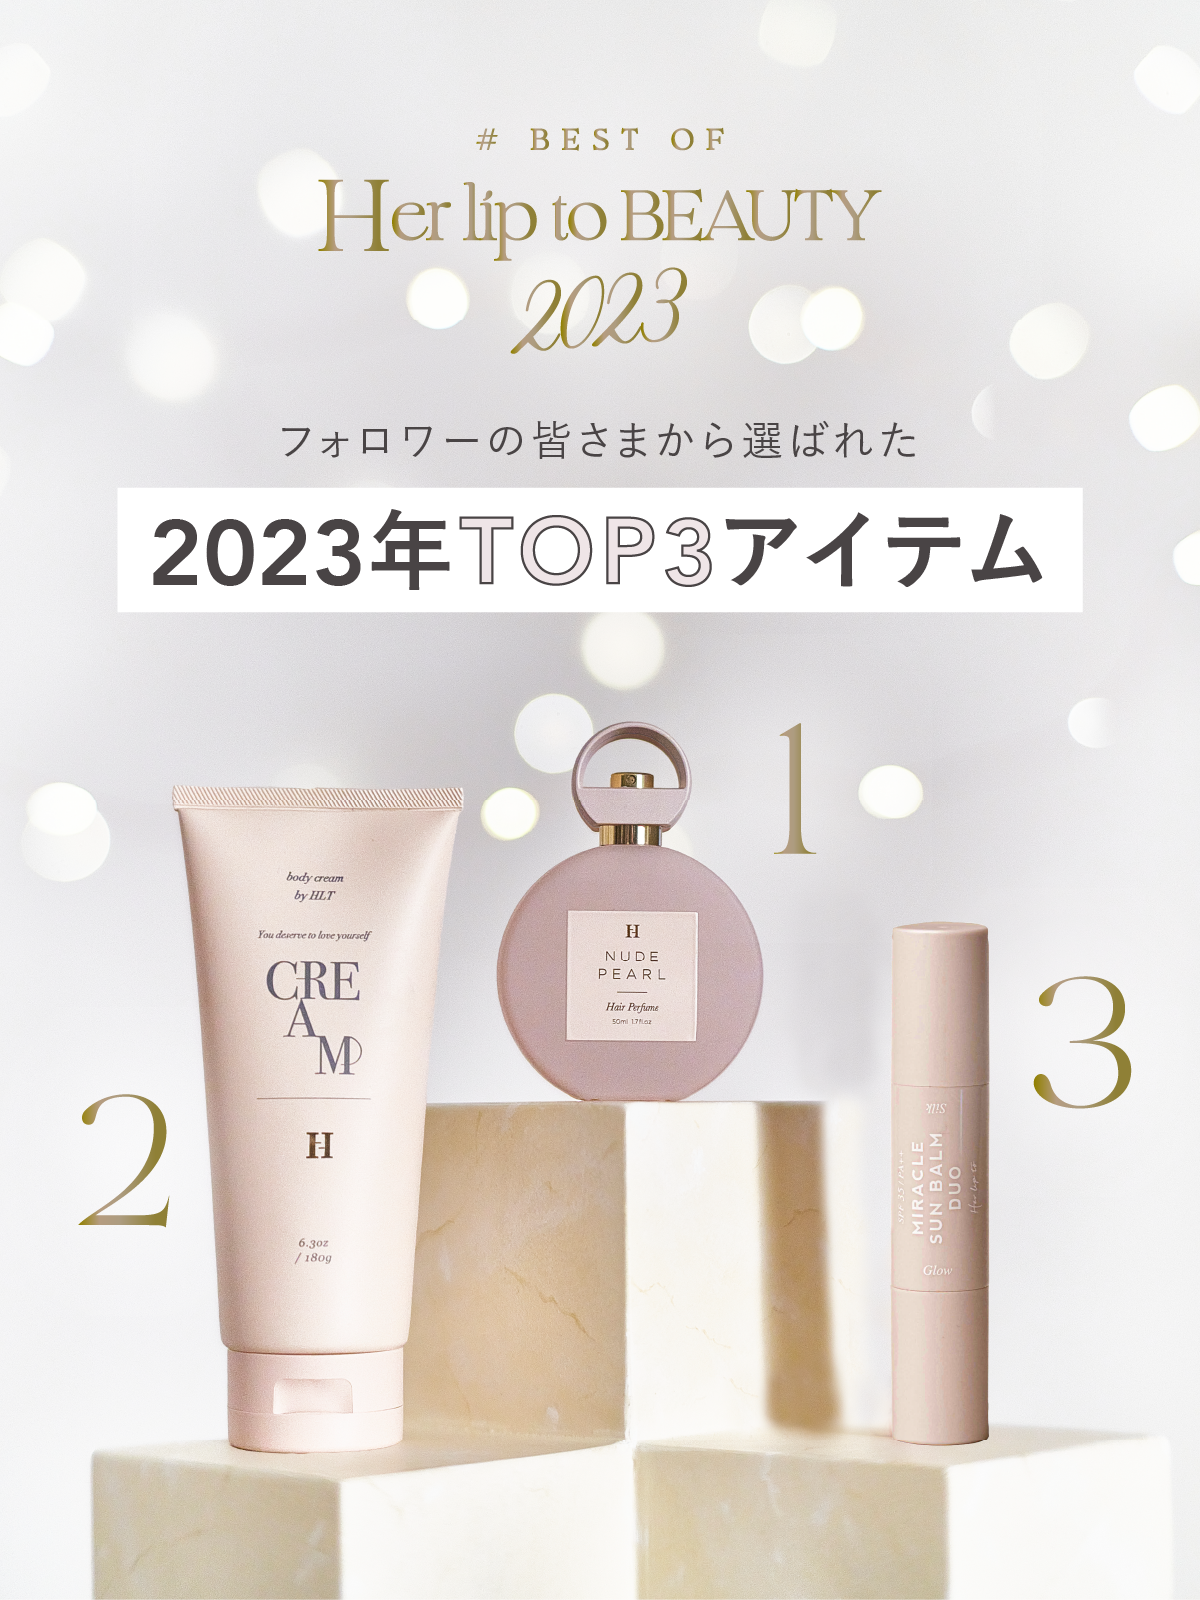 BEST of Her lip to BEAUTY 2023